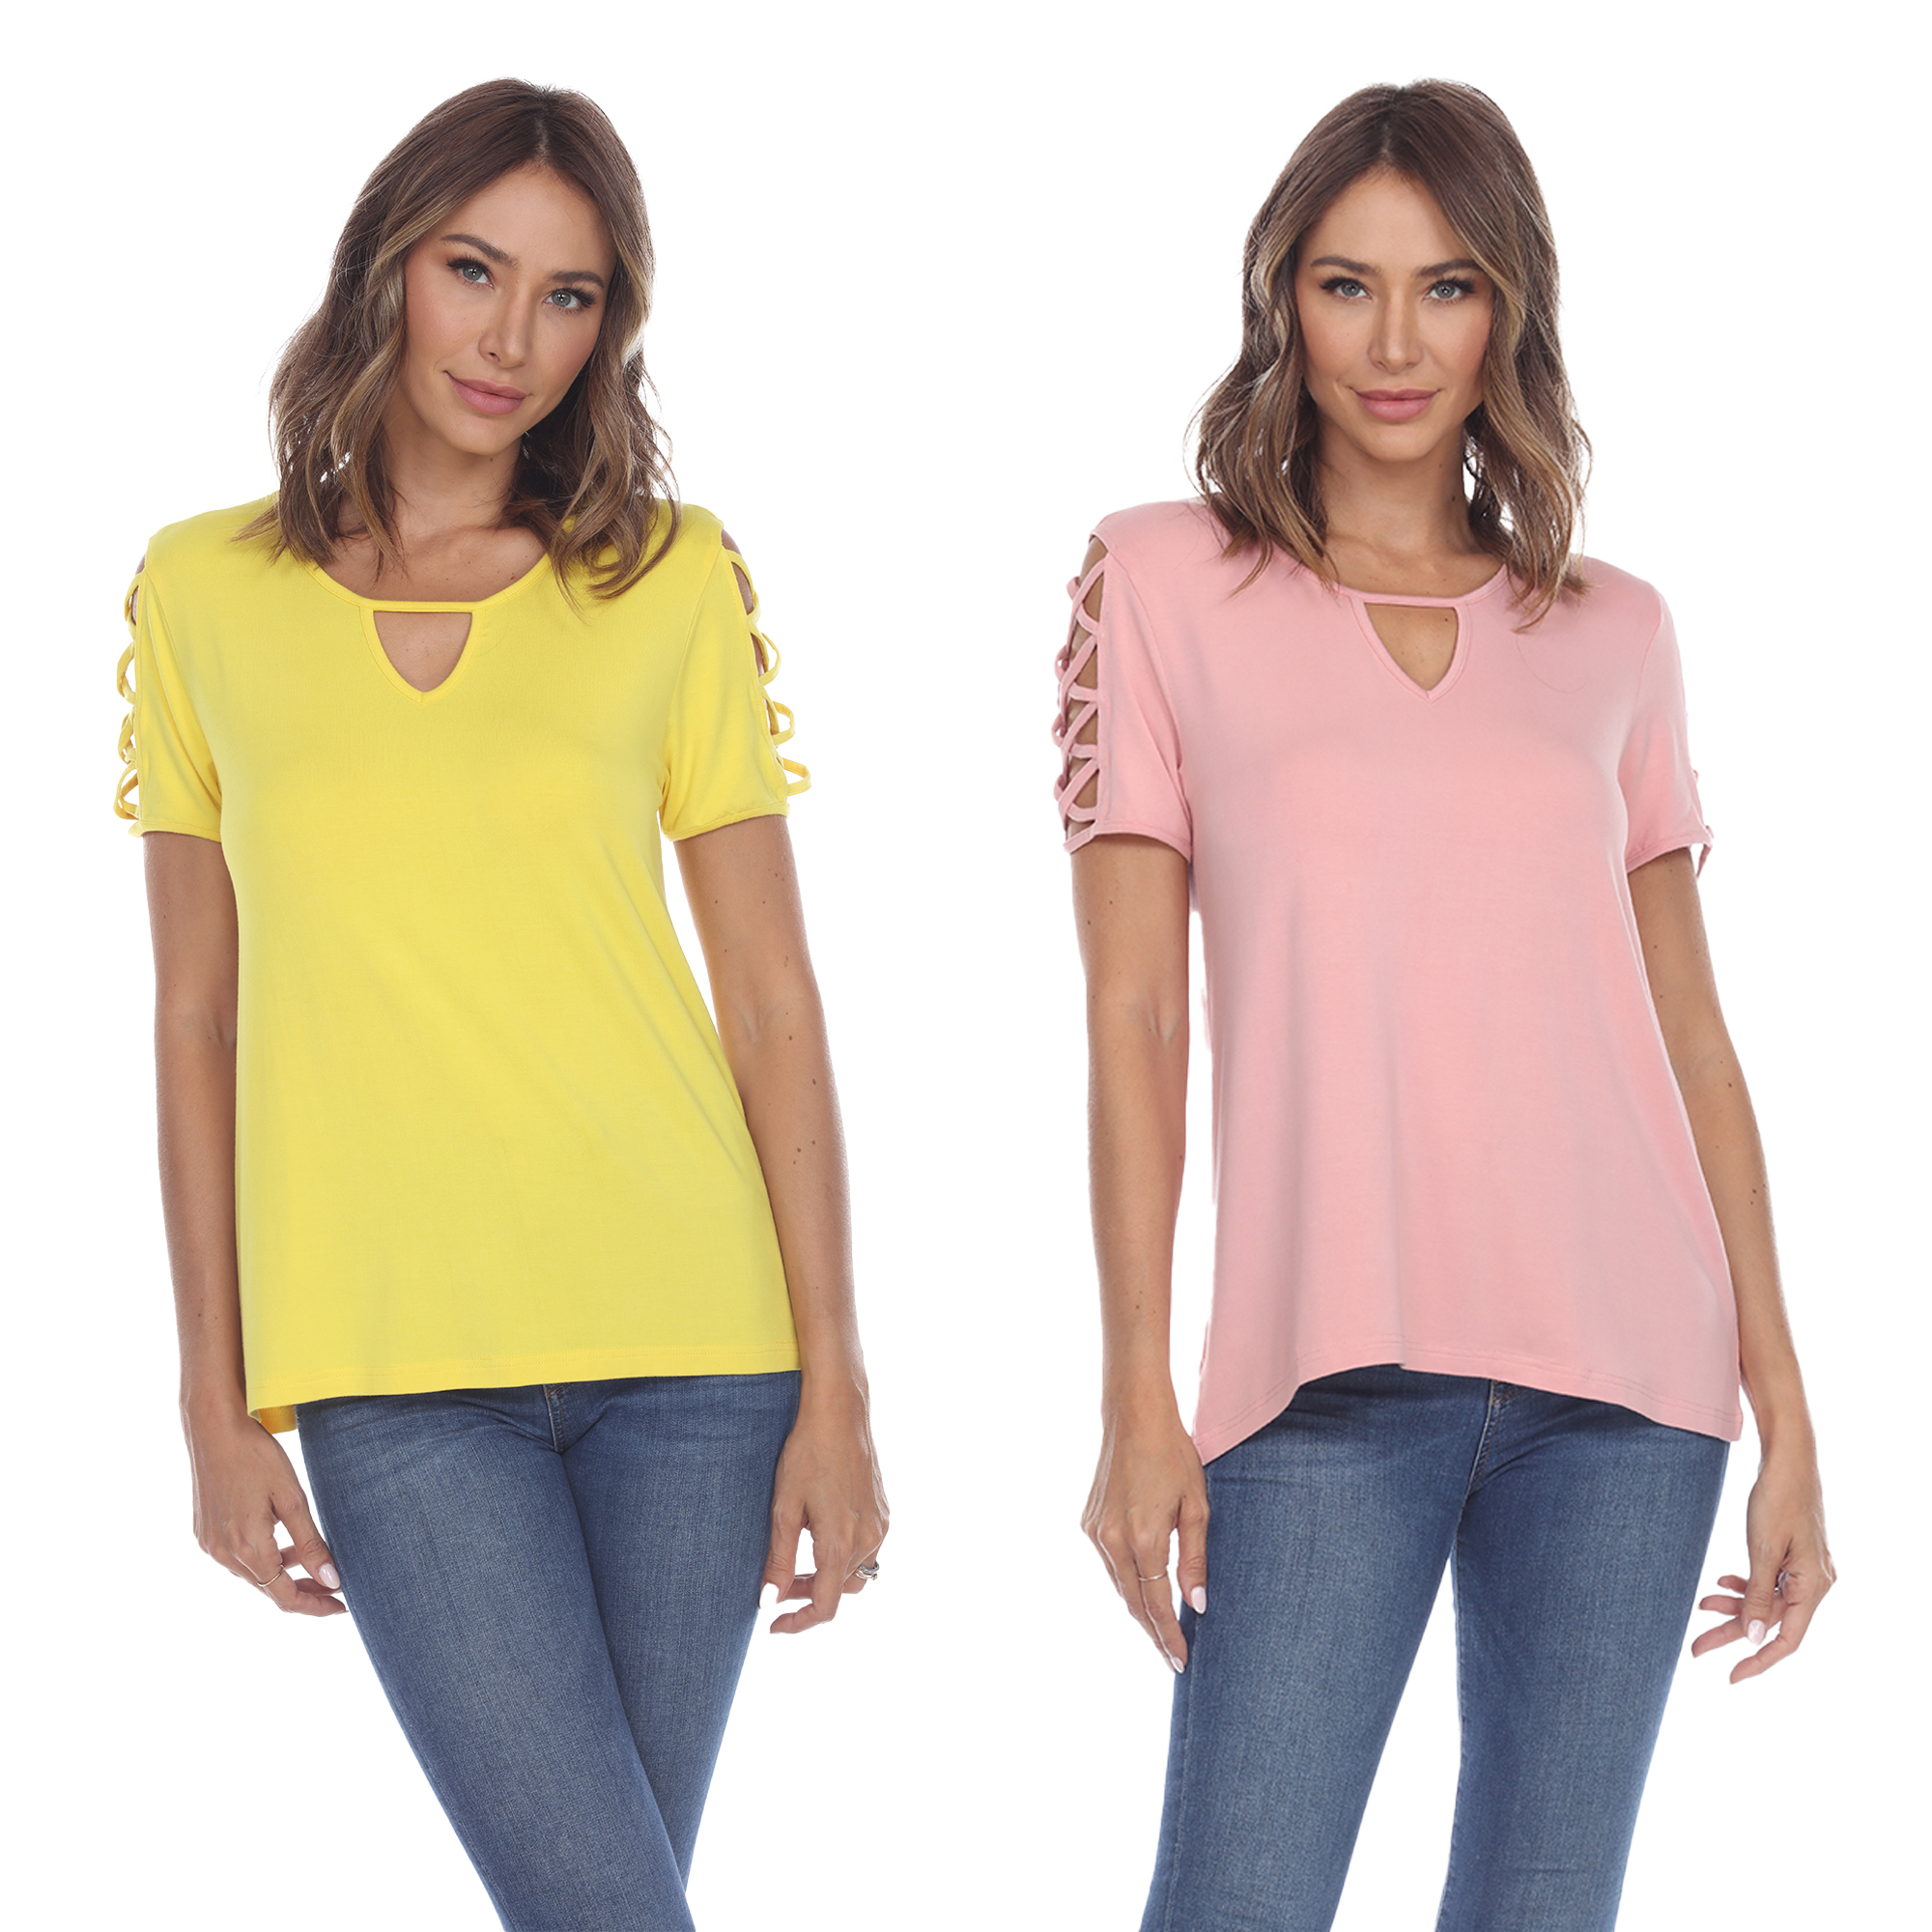 White Mark Women's Pack Of 2 Yellow Keyhole Neck Short Sleeve Top - Yellow Rose, Large